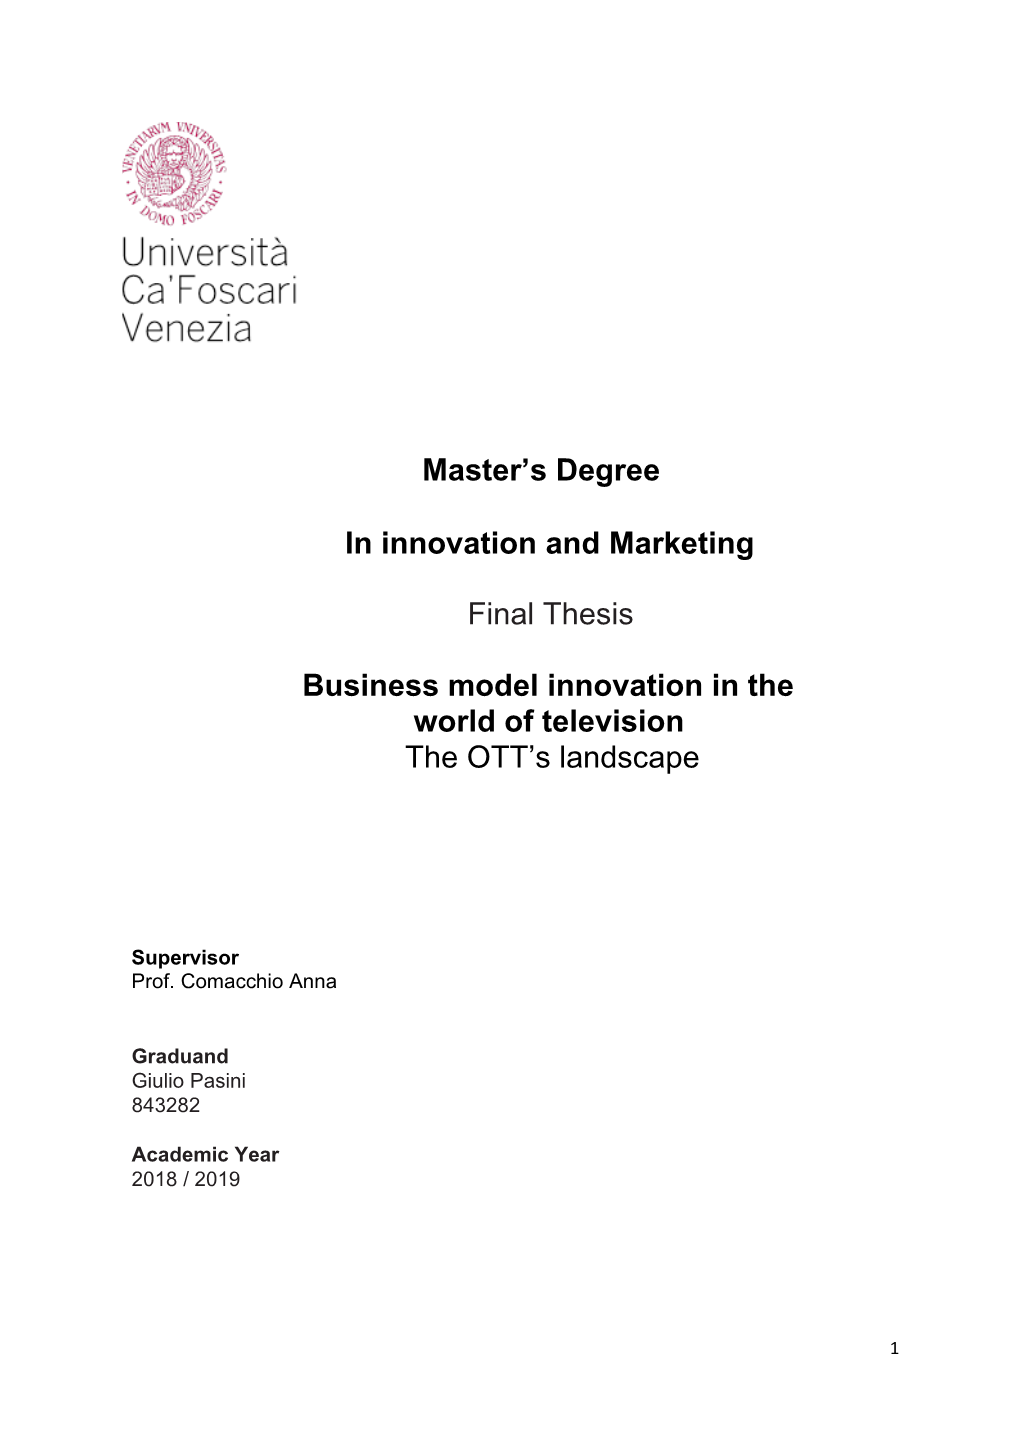 Master's Degree in Innovation and Marketing Final Thesis Business